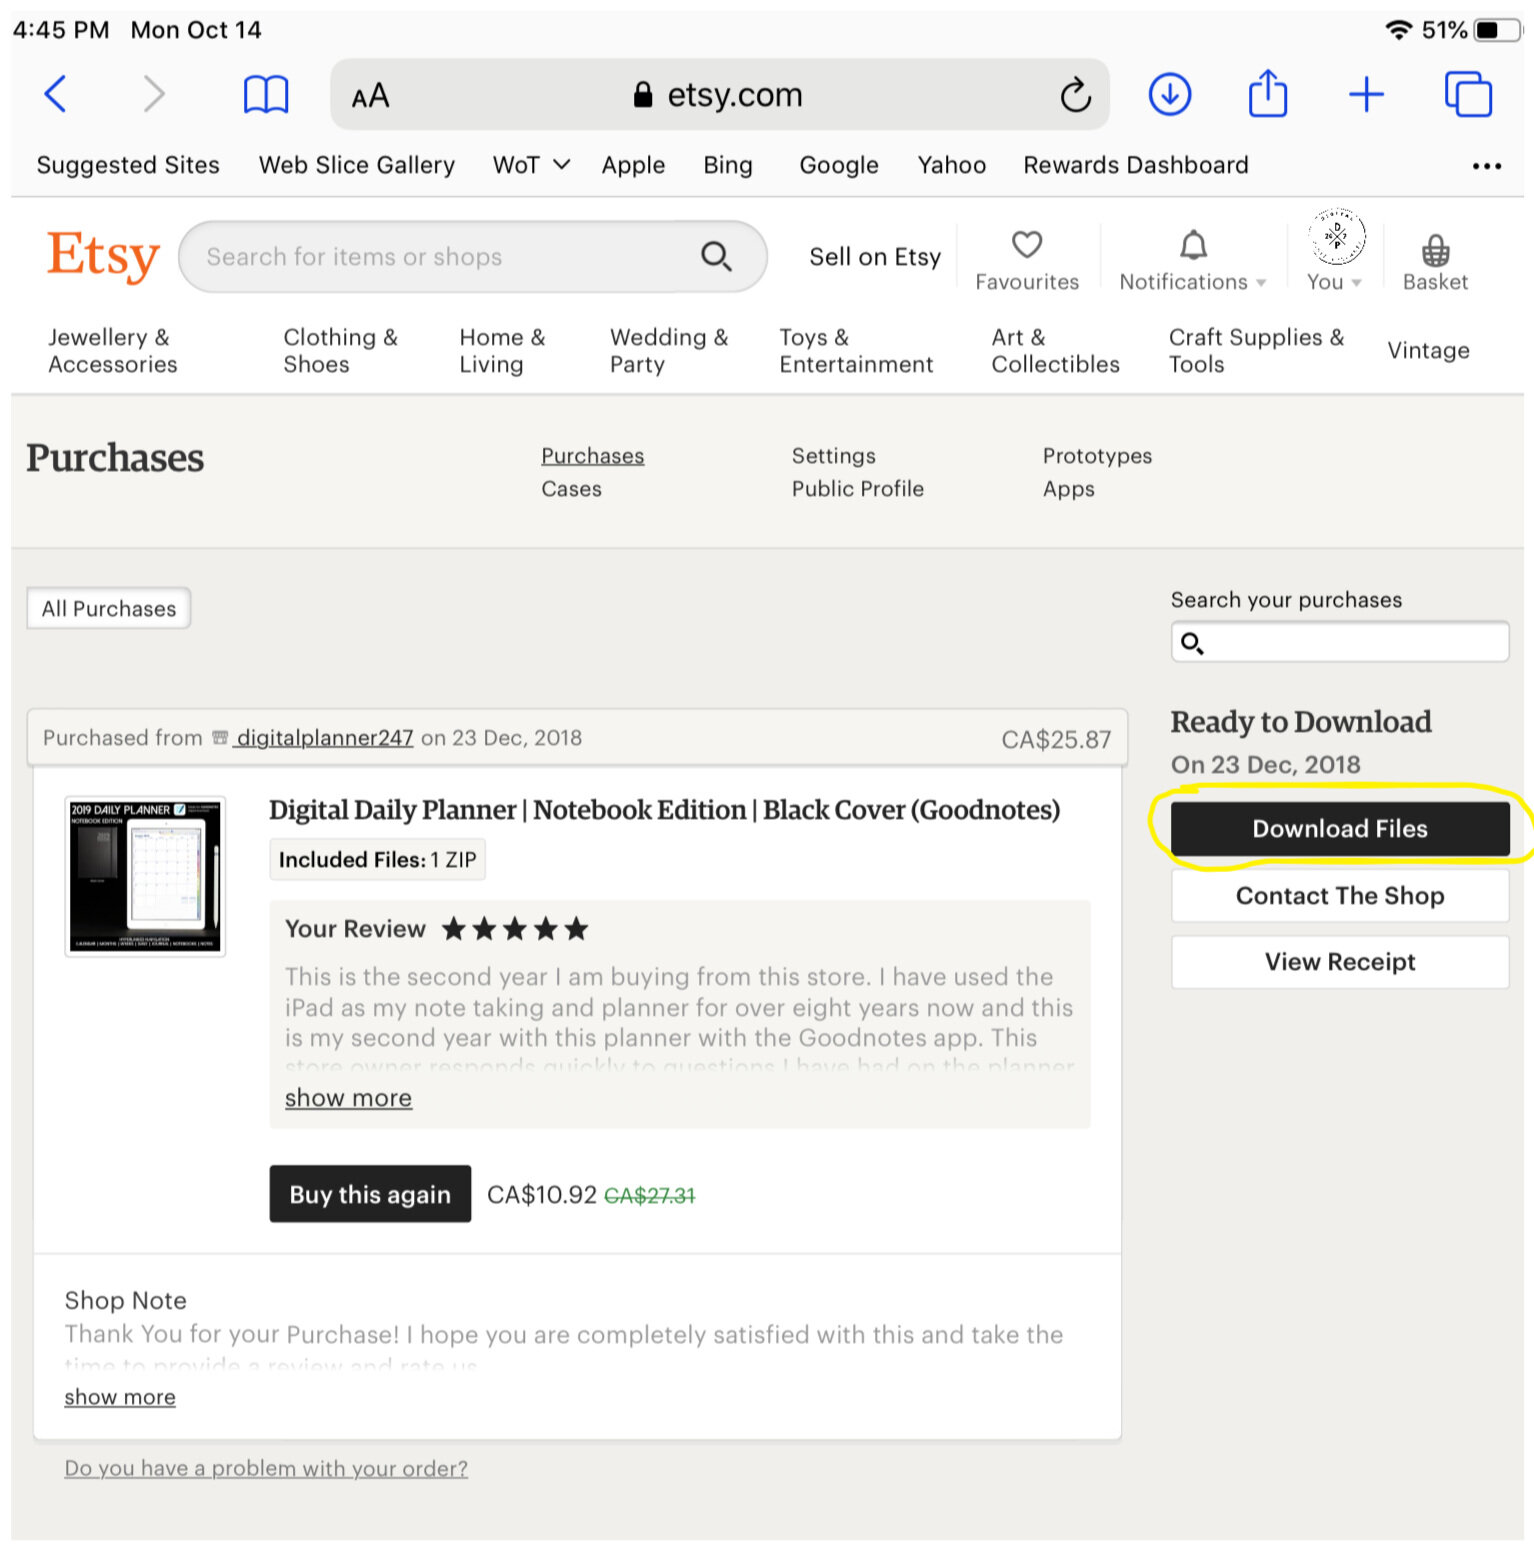 How to download from Etsy — DIGITALPLANNER247